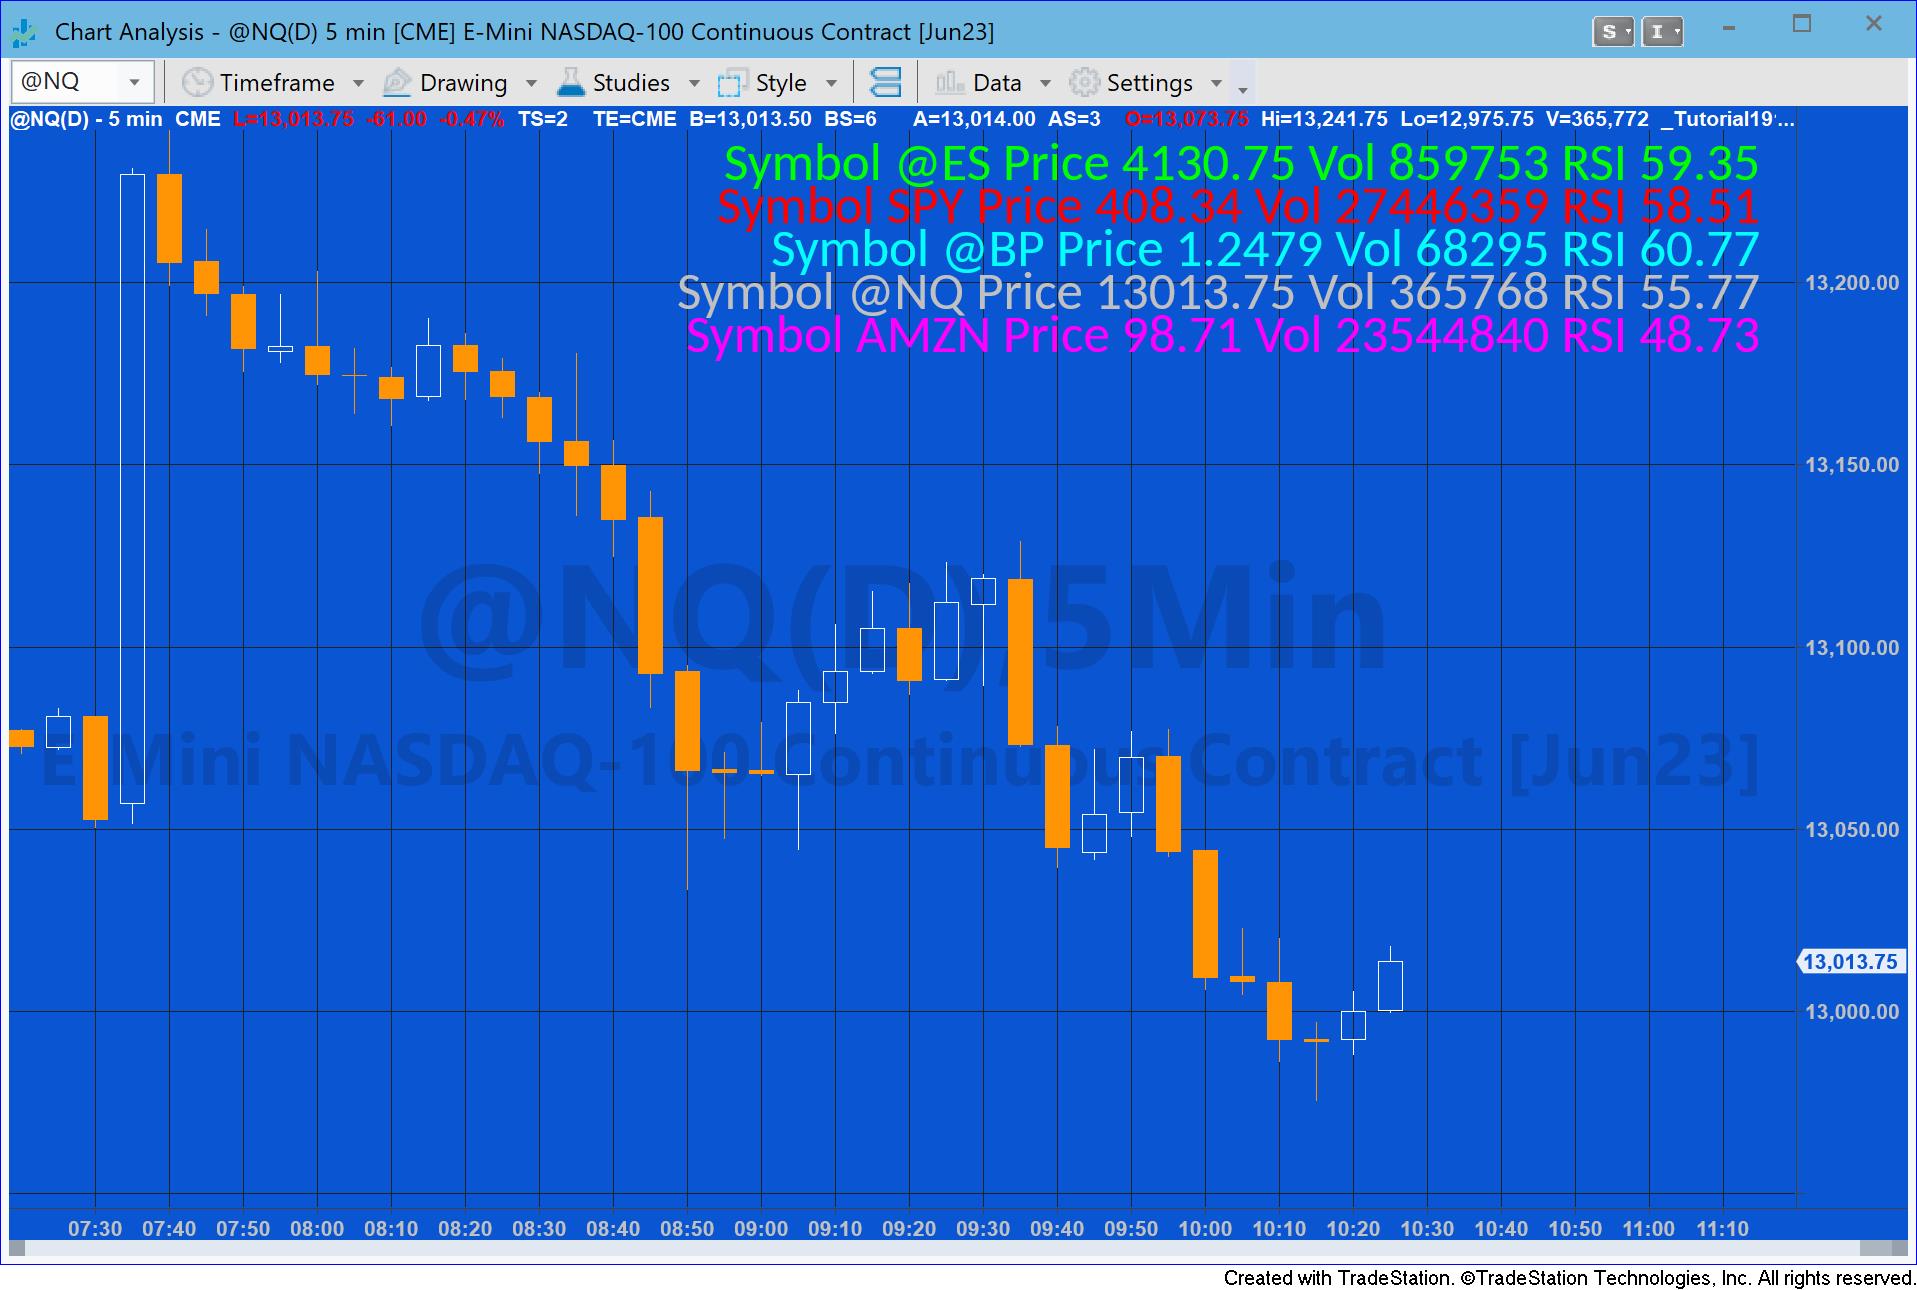 Tutorial 191 applied to a 5 minute @NQ chart 5 times.